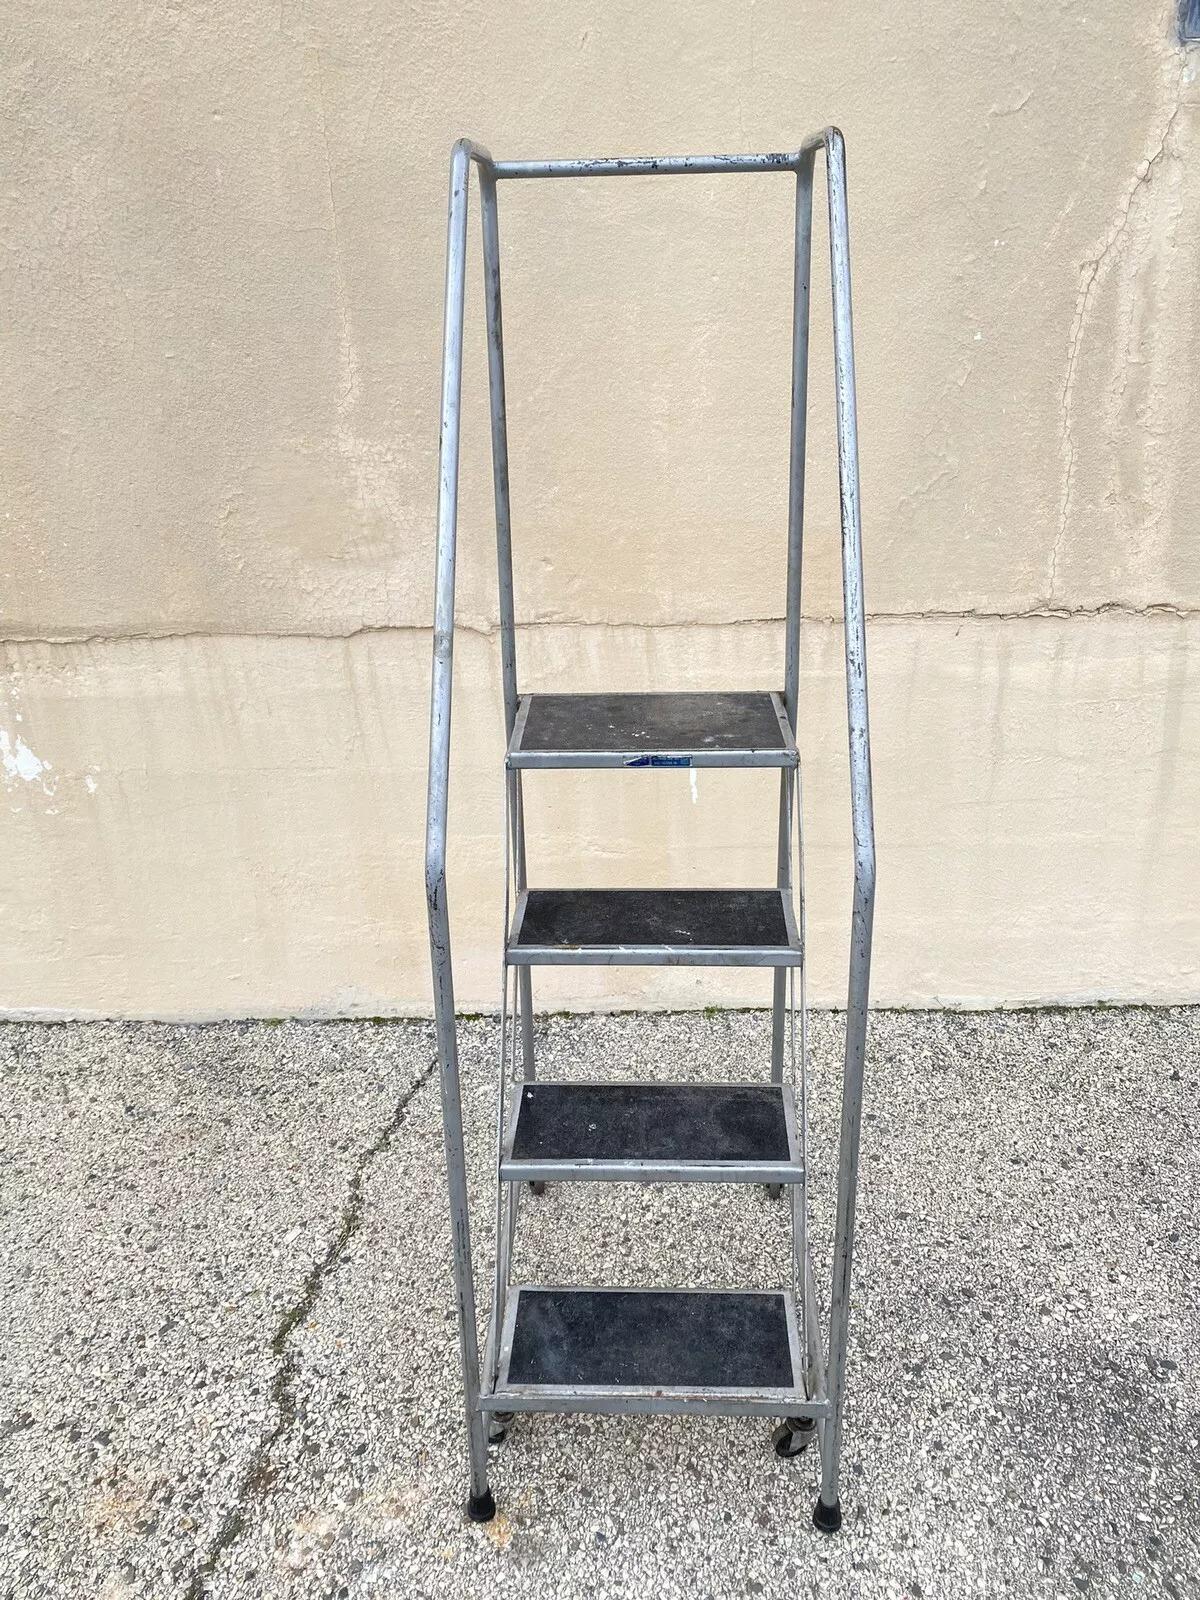 Vintage Ballymore Warehouse Garage 4 Step Metal Rolling Safety Ladder w/ Rails. Circa  Late 20th Century. Measurements: 68.5